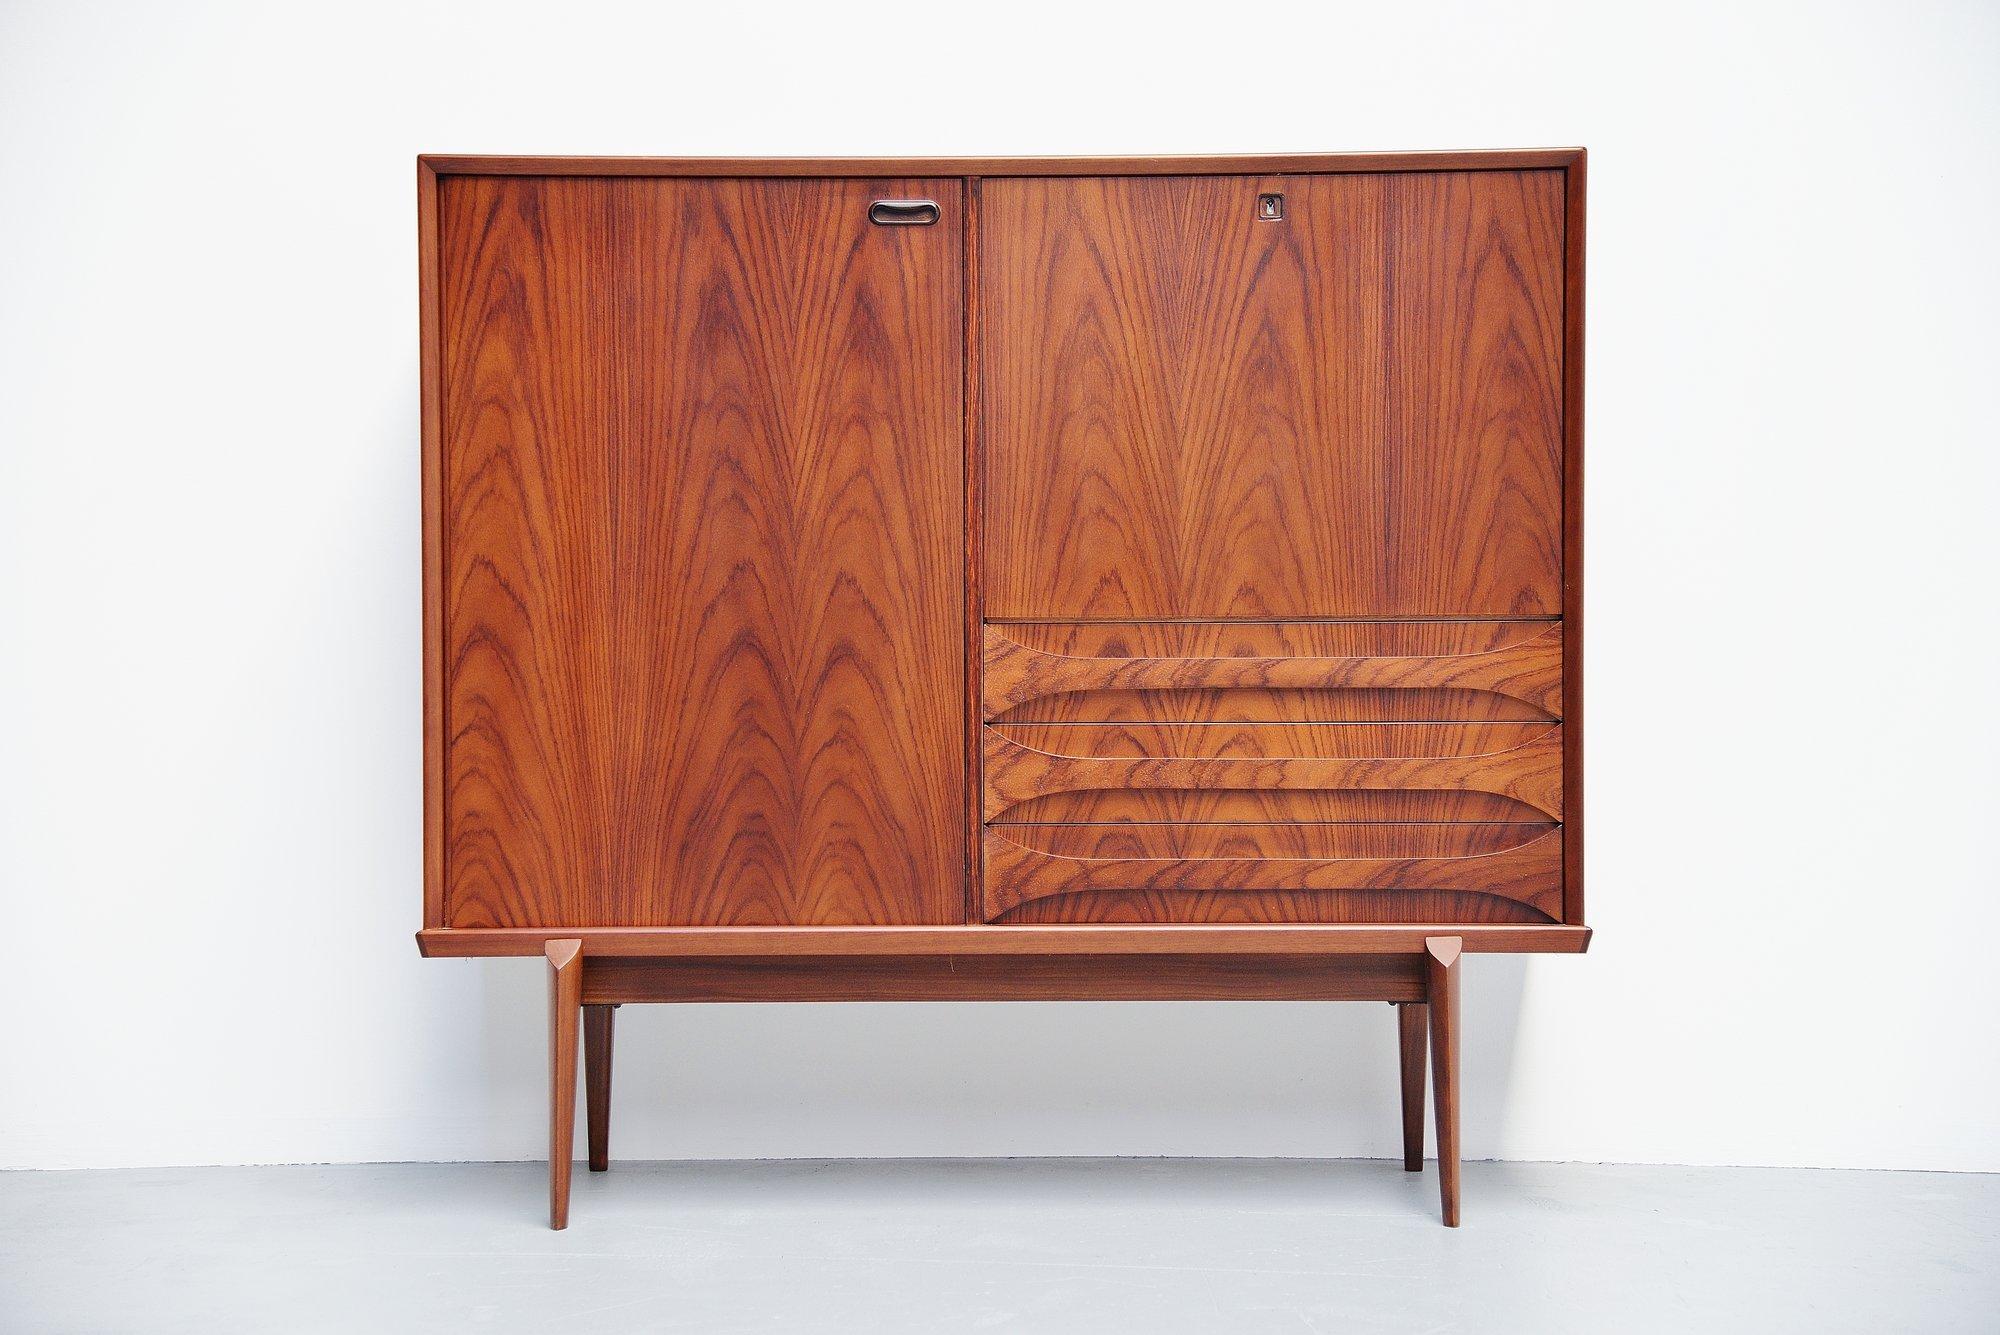 Very nice and quality buffet designed by Oswald Vermaercke for V-Form, Belgium 1959. This amazing buffet has a very nice and warm rosewood color and is fully refinished into perfect condition. The designs by Oswald Vermaercke are visibly inspired by